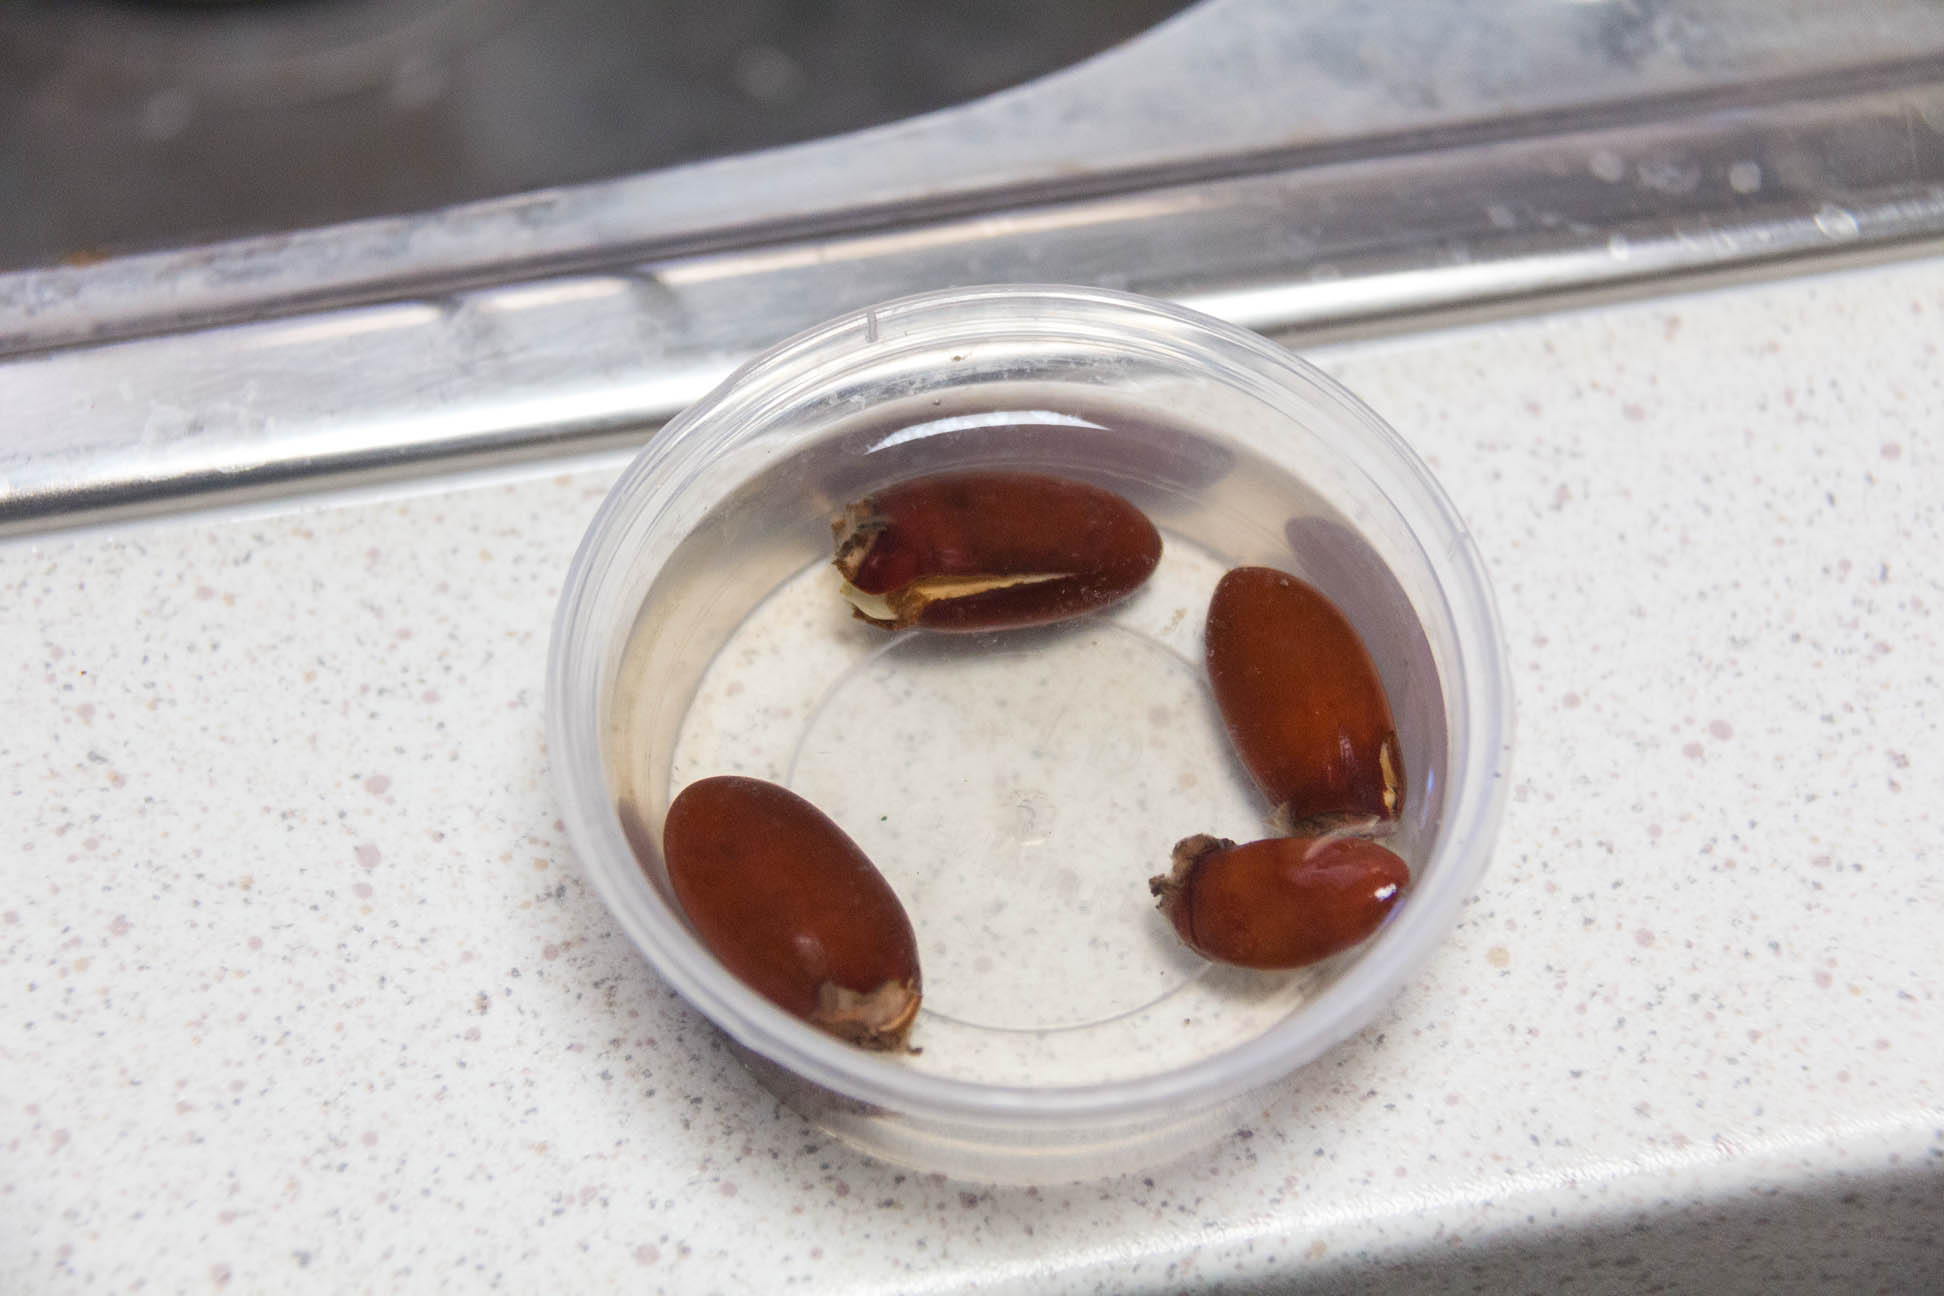 12/01/15 Day 12: Lychee seed germination experimentation Seeds in water has cracked a little